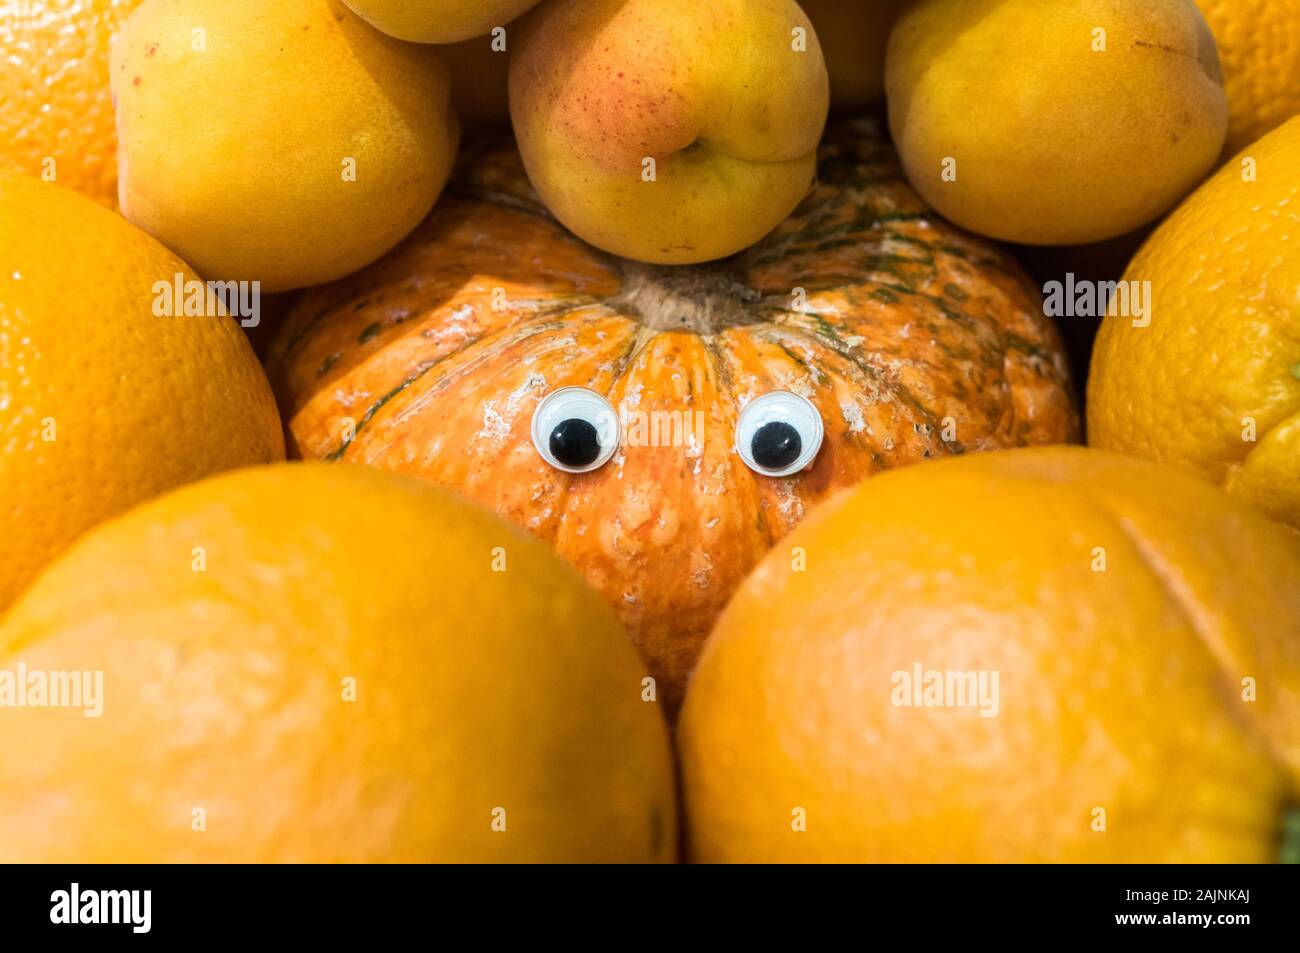 Concept of pumpkin with artificial eyes surrounded by oranges, imitating to be one of them. Stock Photo